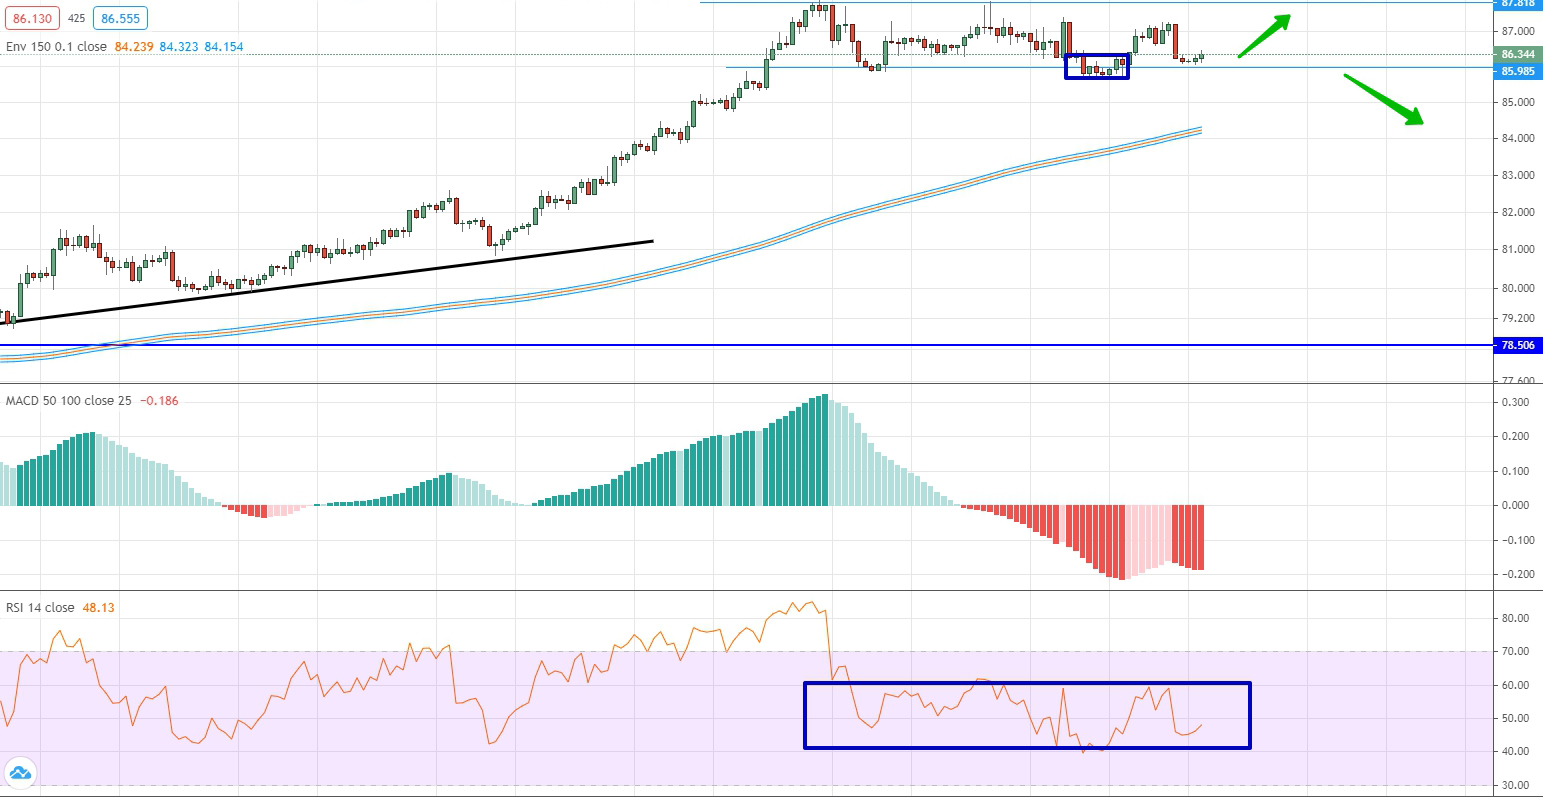 analysis of NZD/USD by moving averages, RSI and MACDD